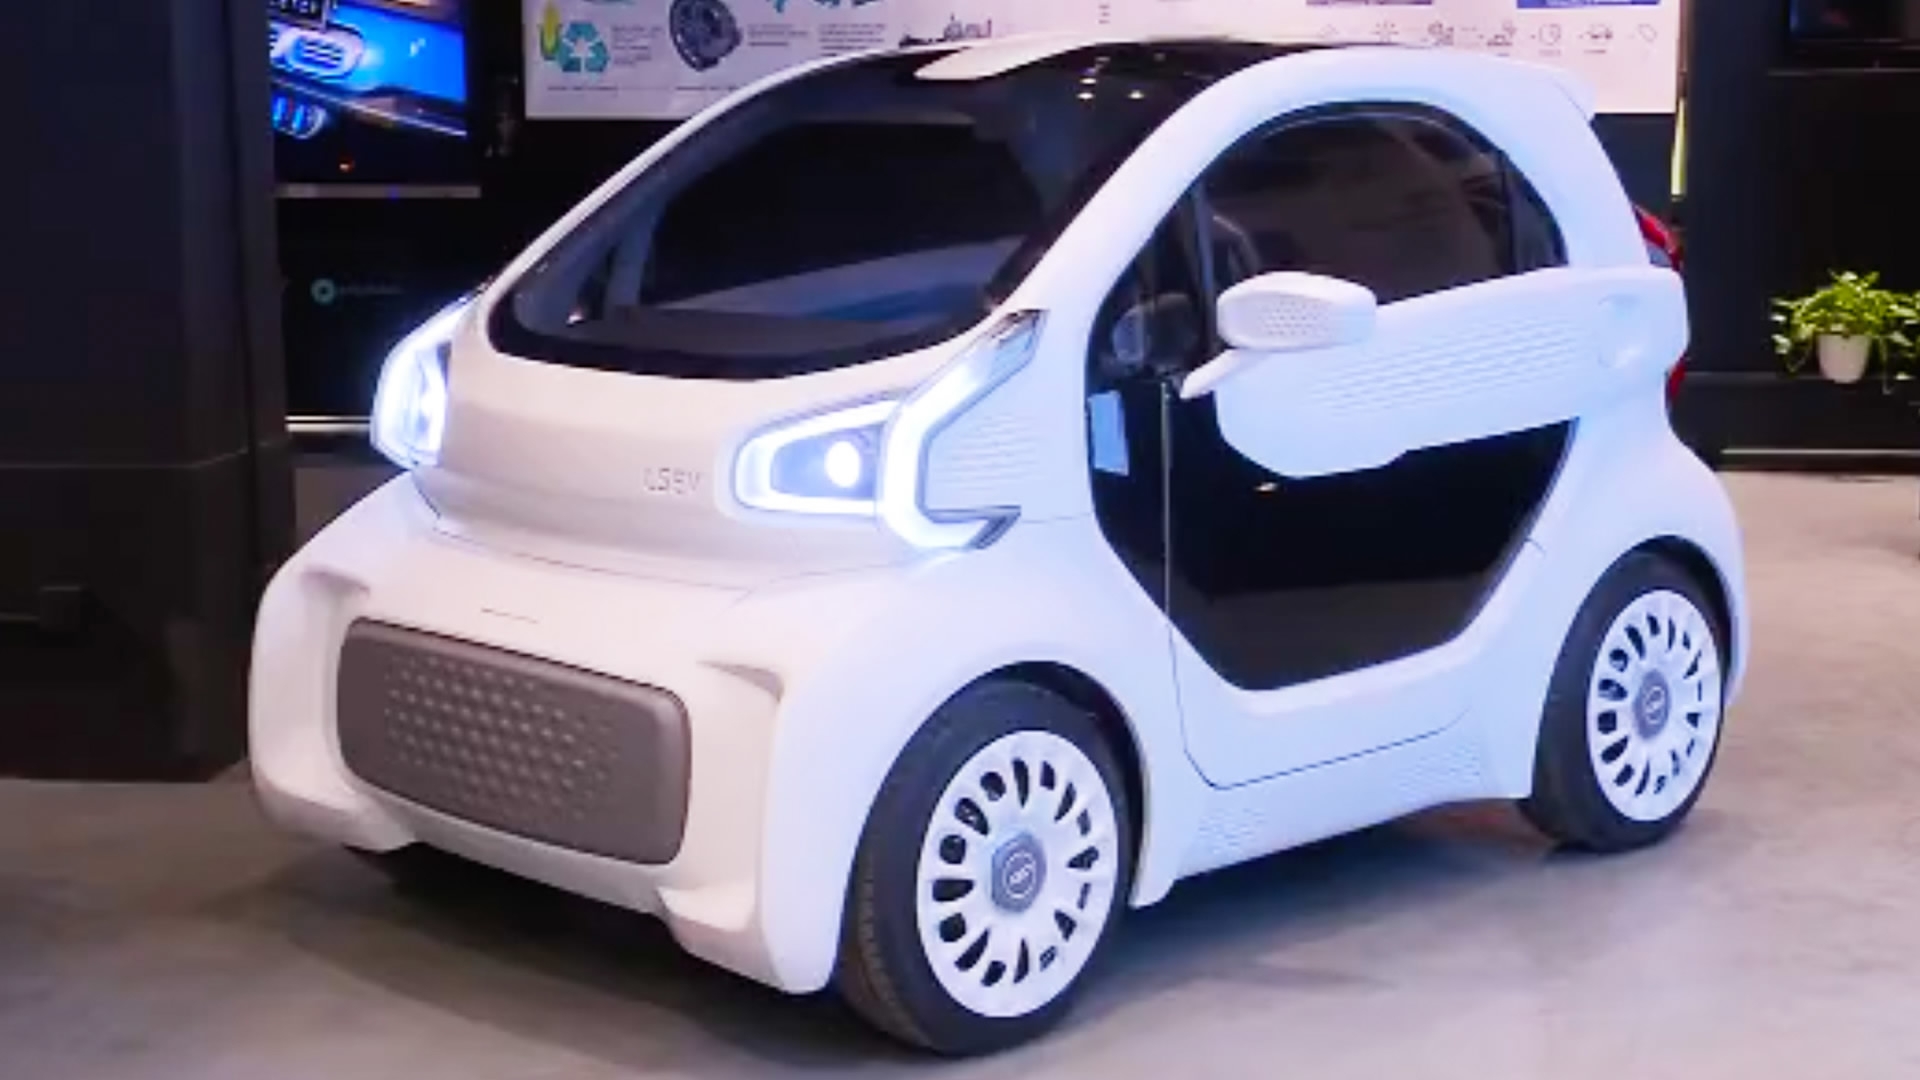 LSEV, the world's first 3Dprinted electric vehicle will be on the